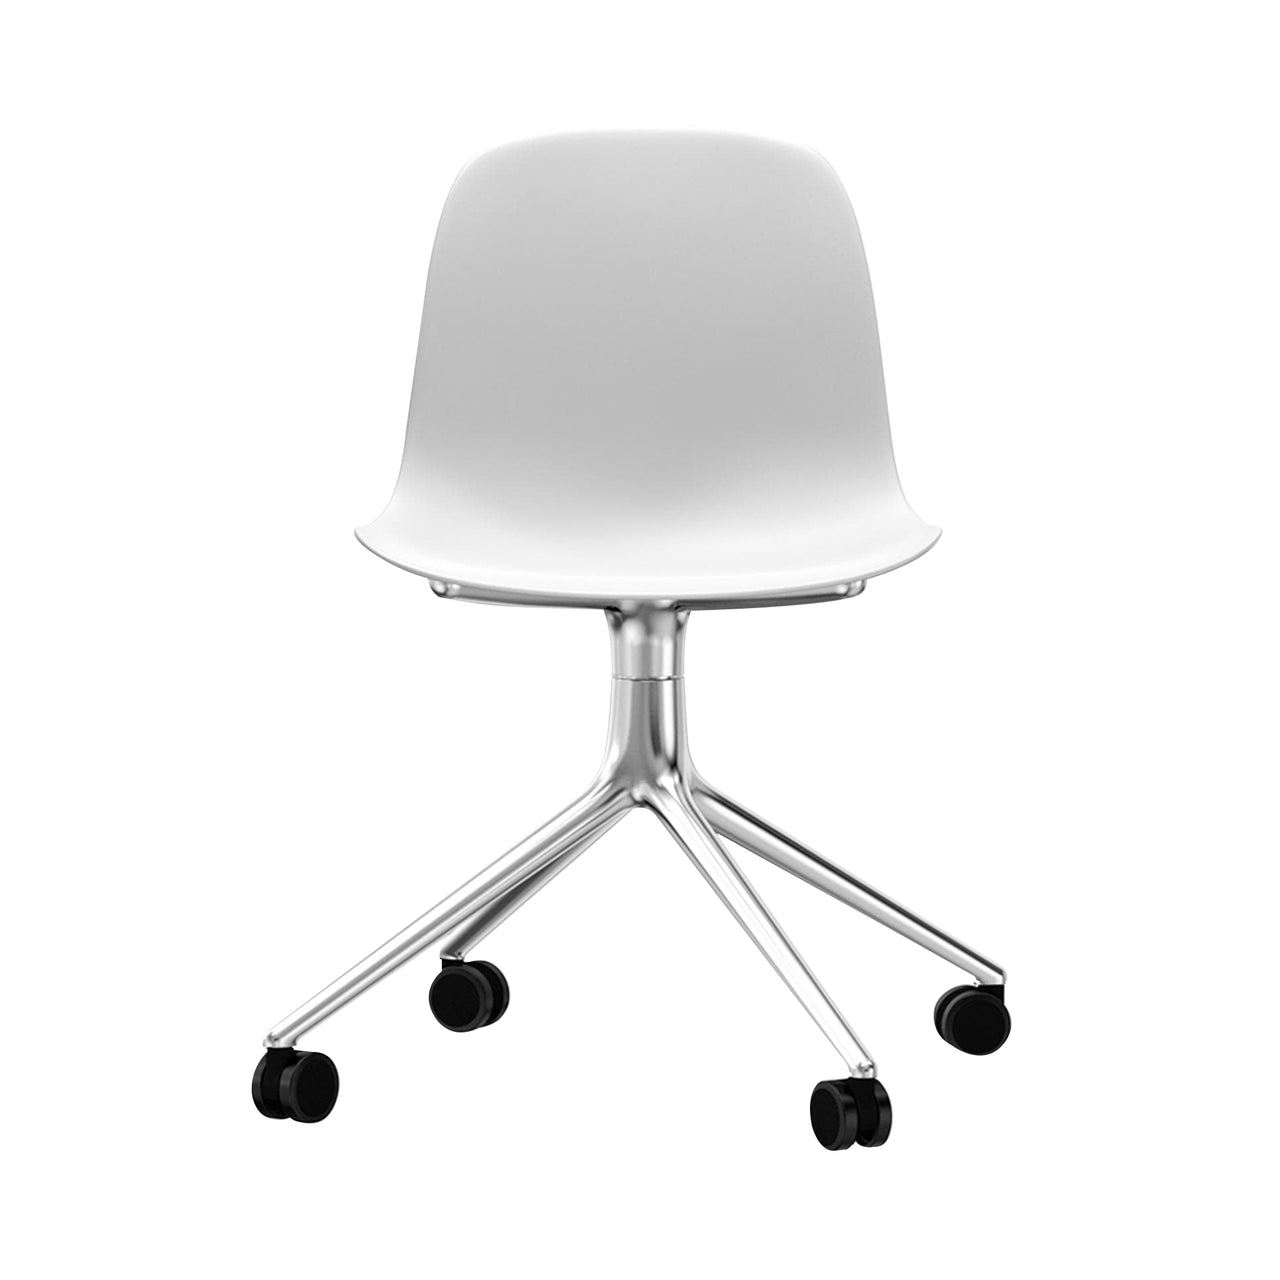 Form Chair: Swivel + White + Aluminum + With Casters